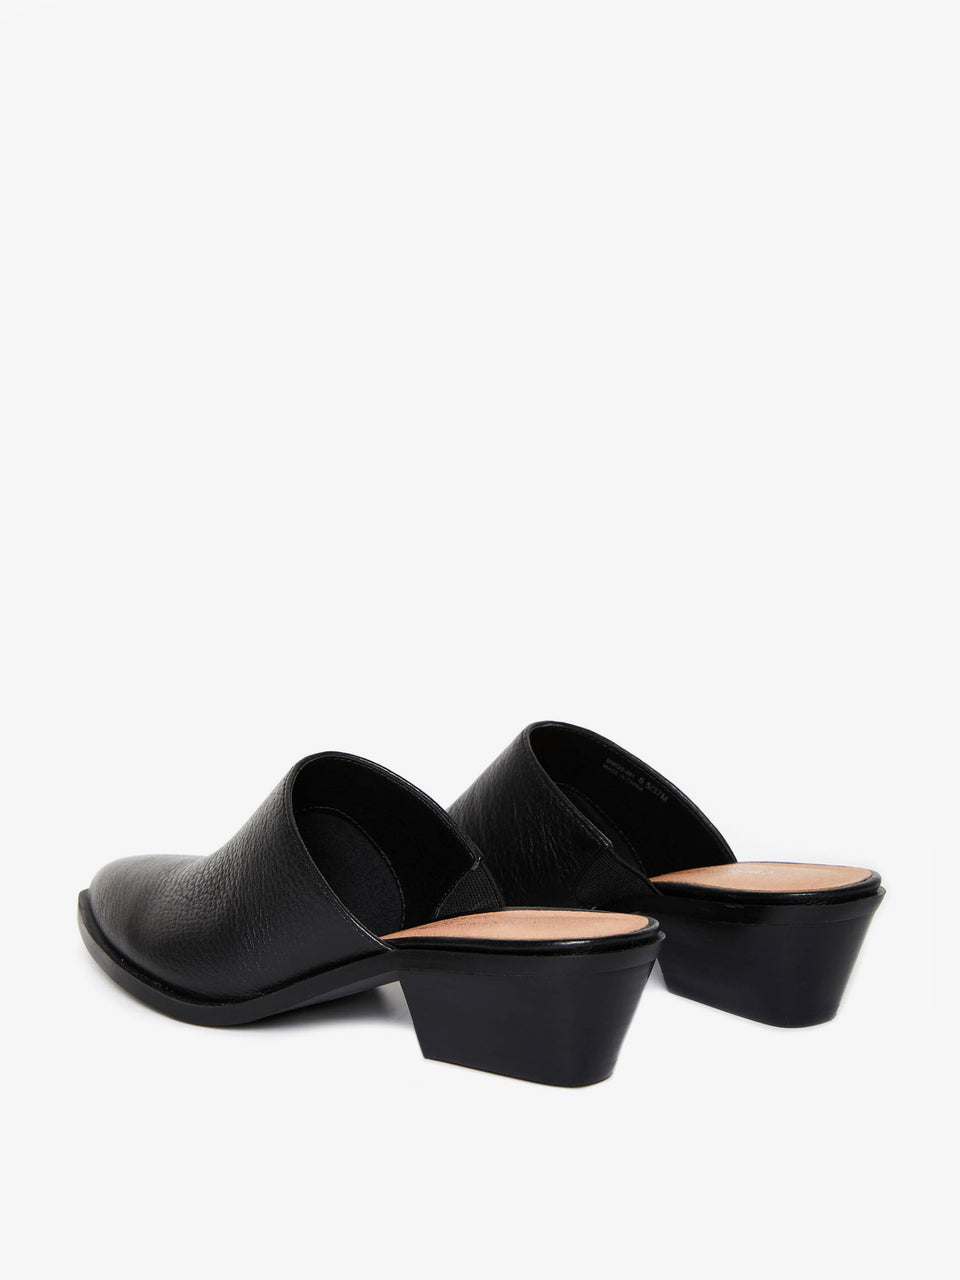 Chinese_Laundry_Millie_Leather_Mule_Black